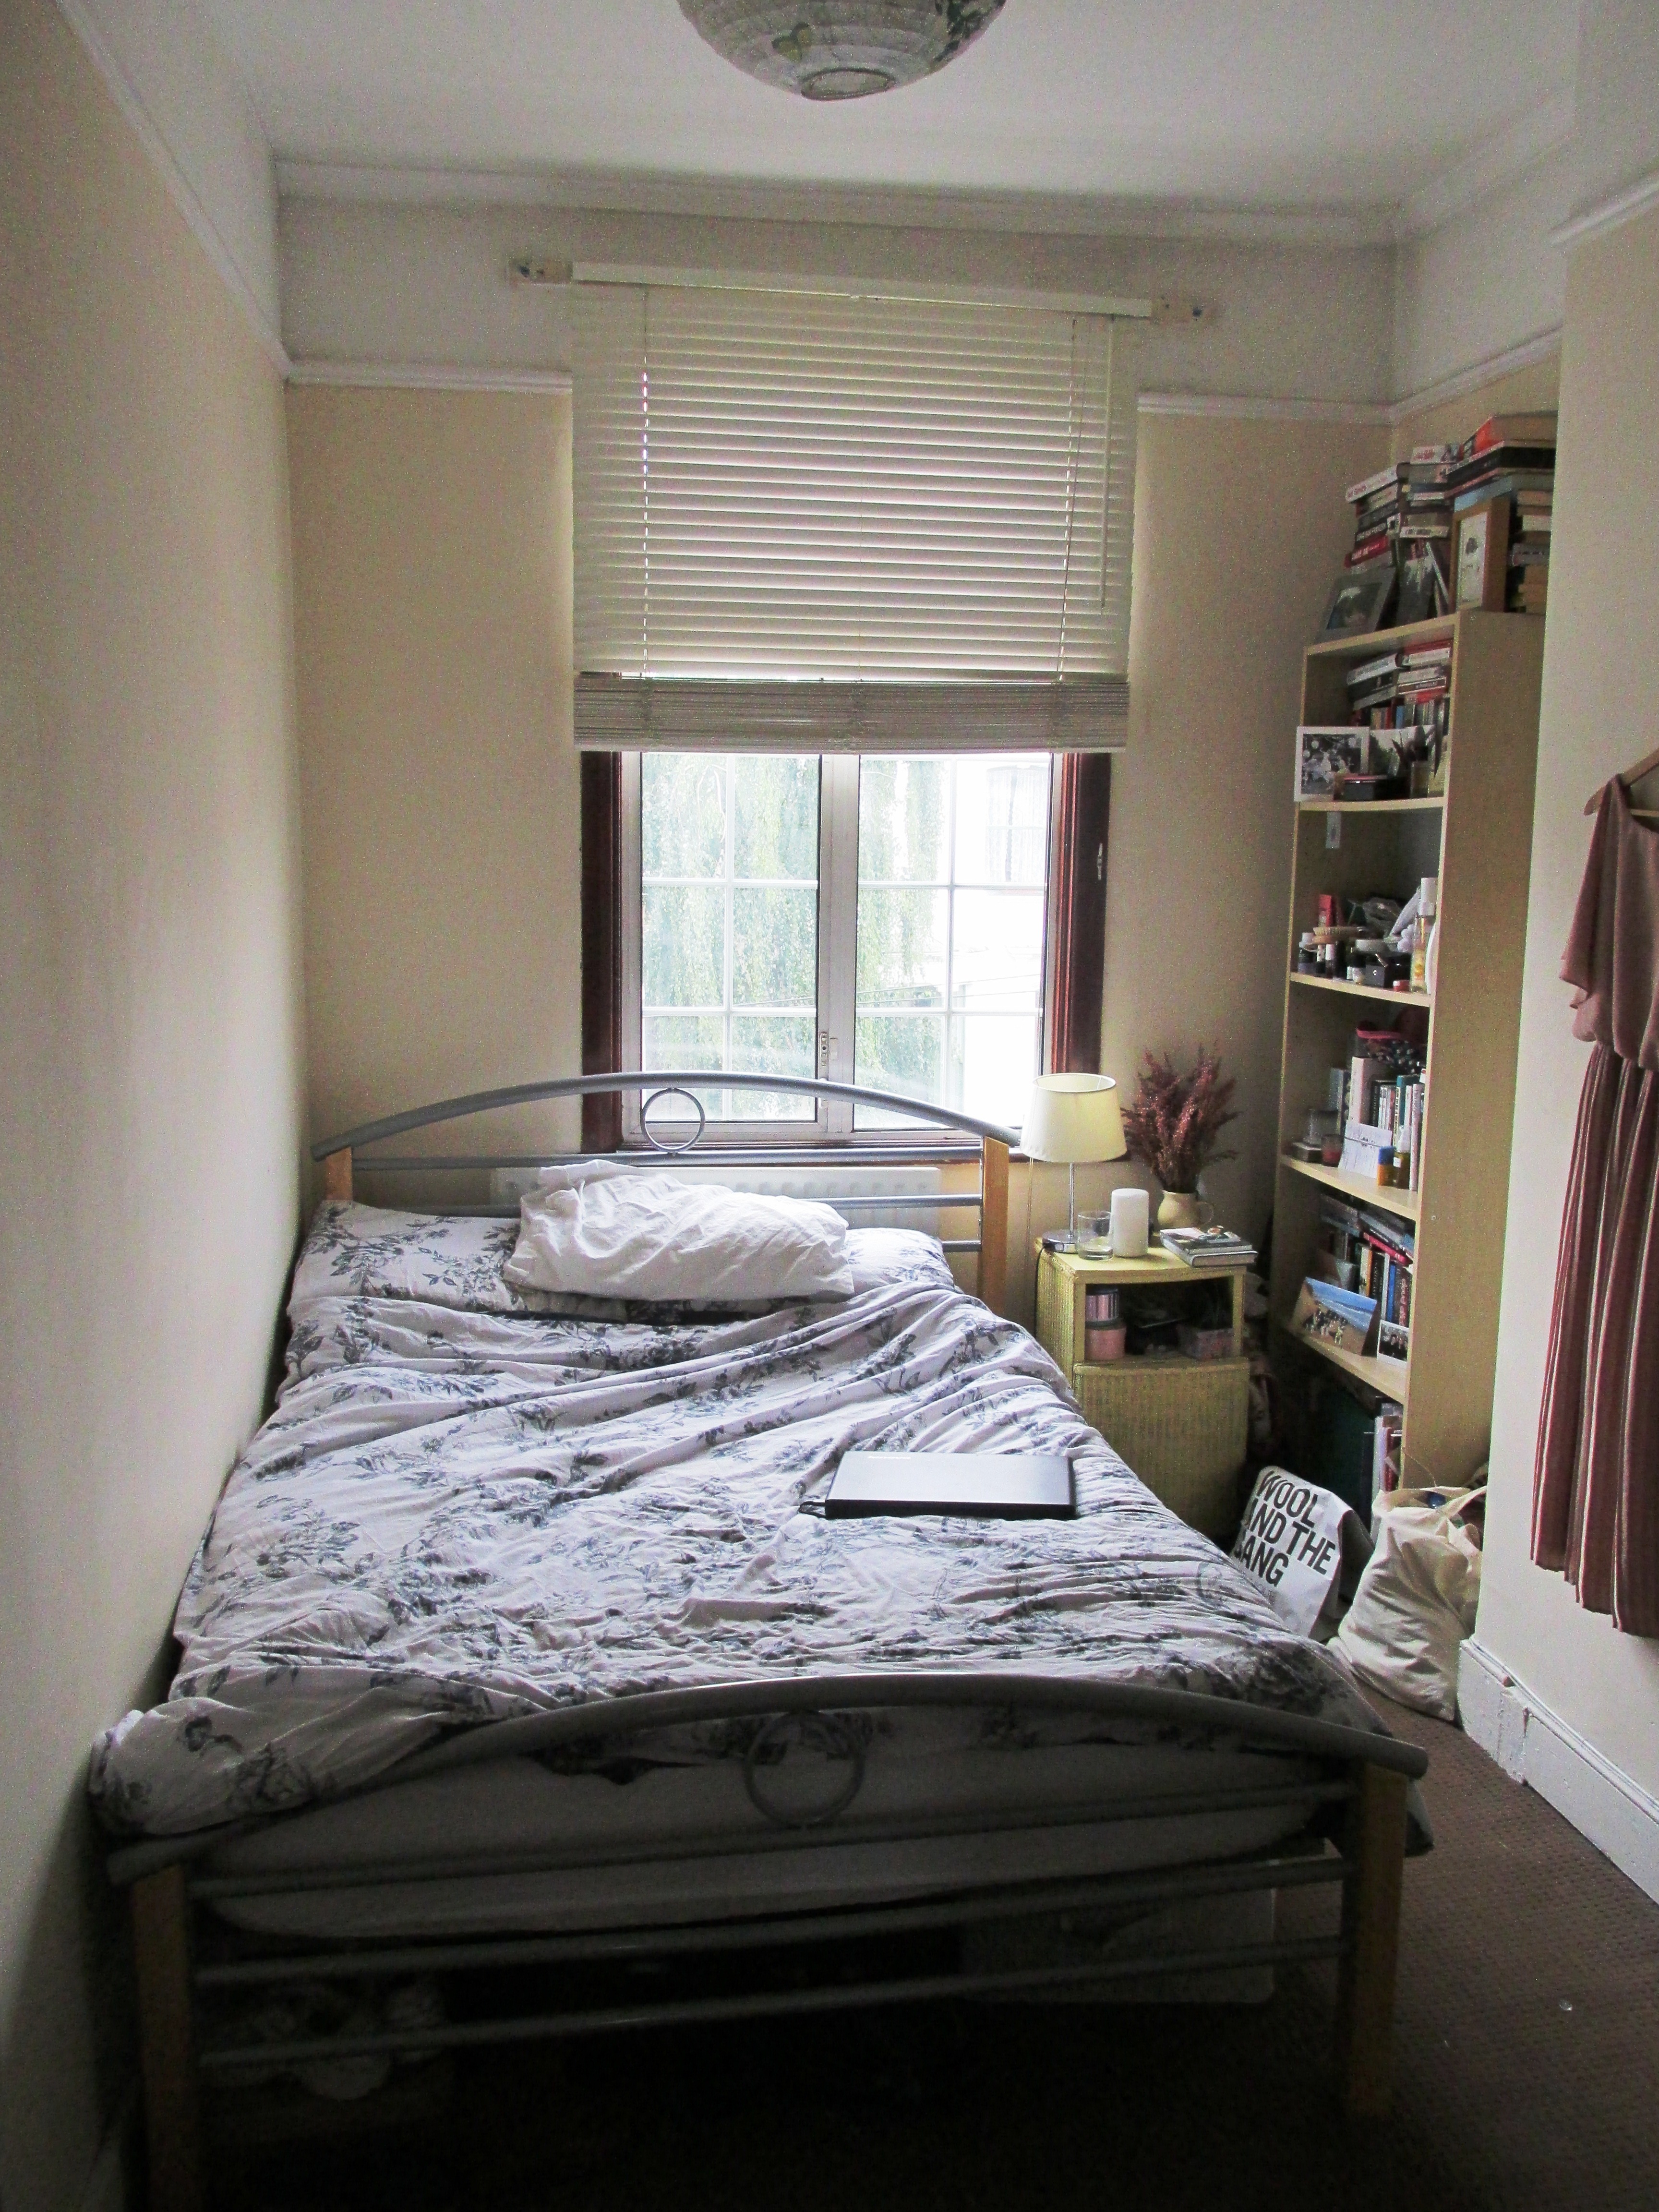 Spacious bedrooms to let  situated in Rectory Road Overground, London N16.